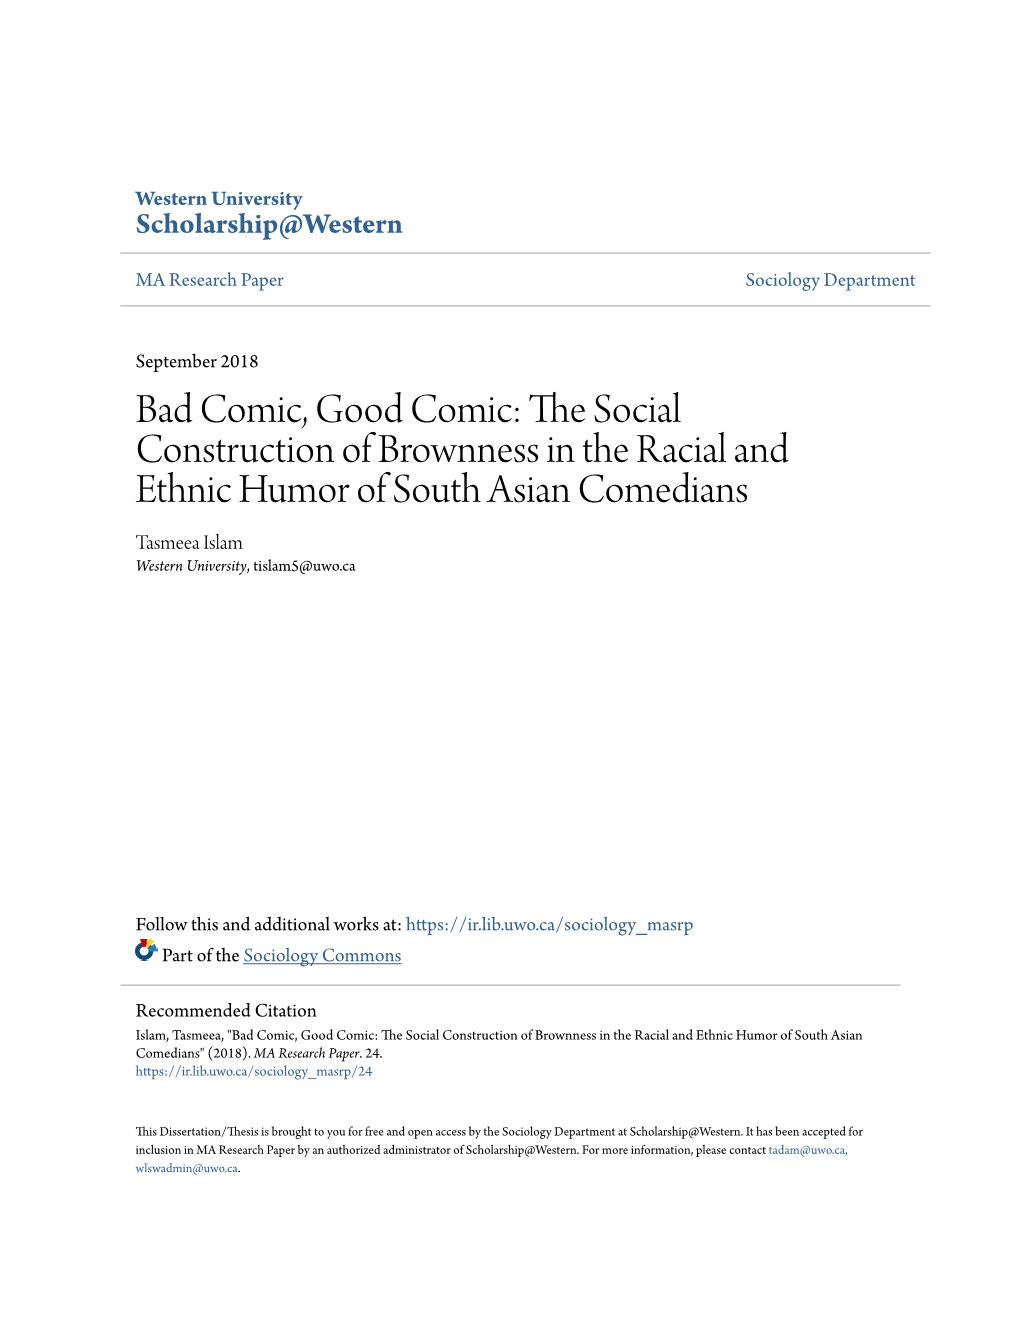 The Social Construction of Brownness in the Racial and Ethnic Humor of South Asian Comedians